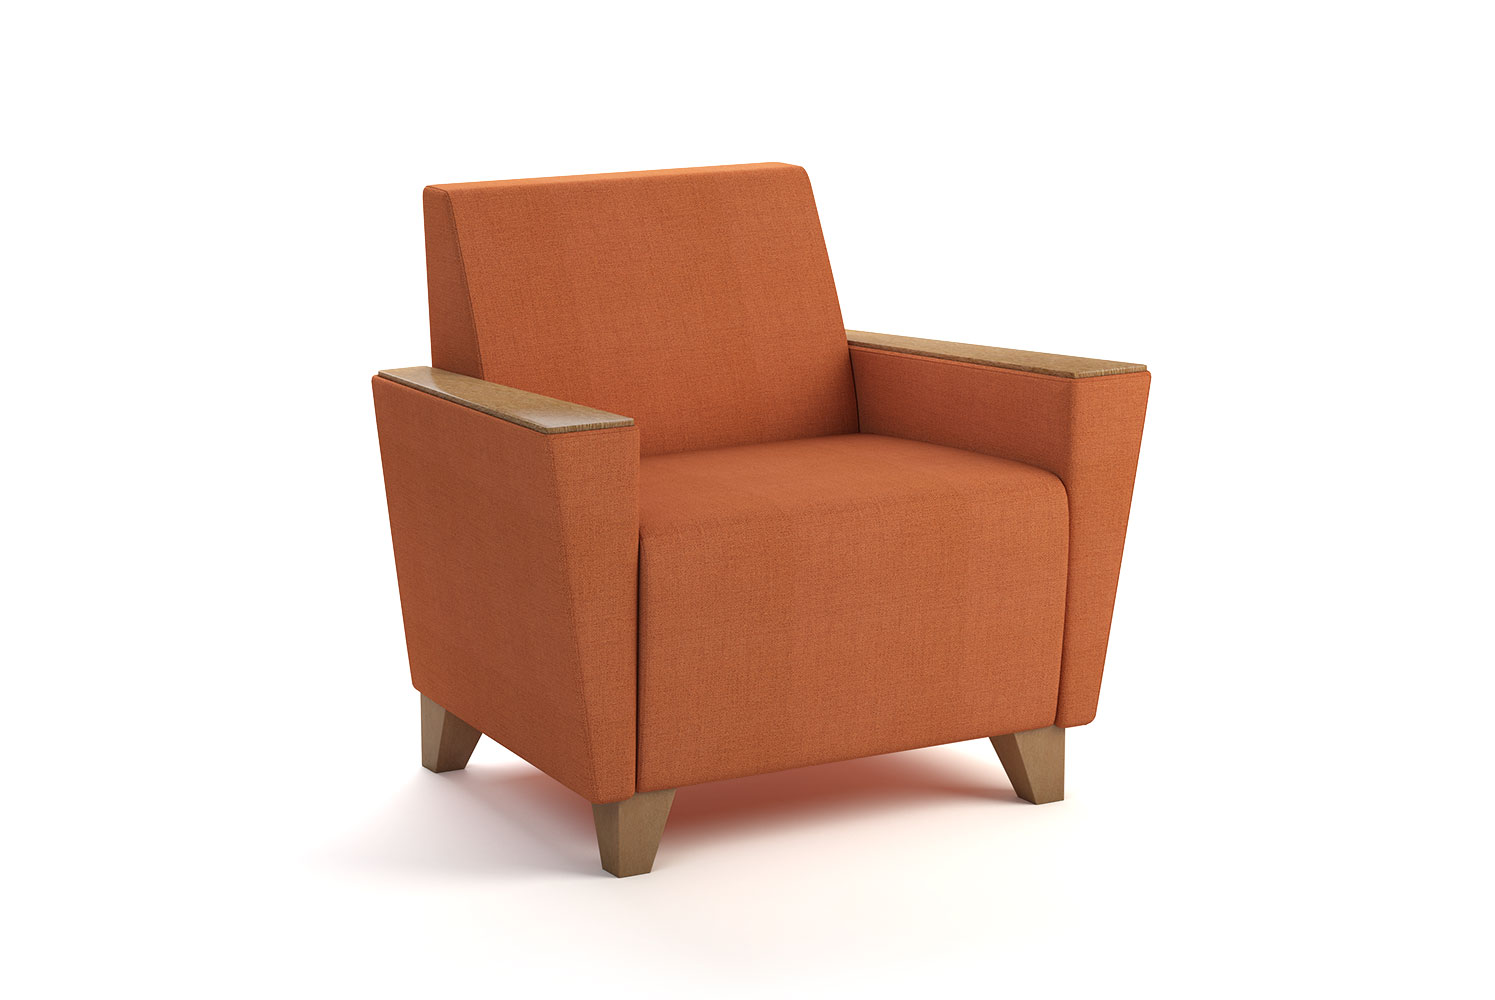 Flair lounge in orange color with wood legs and optional arm caps